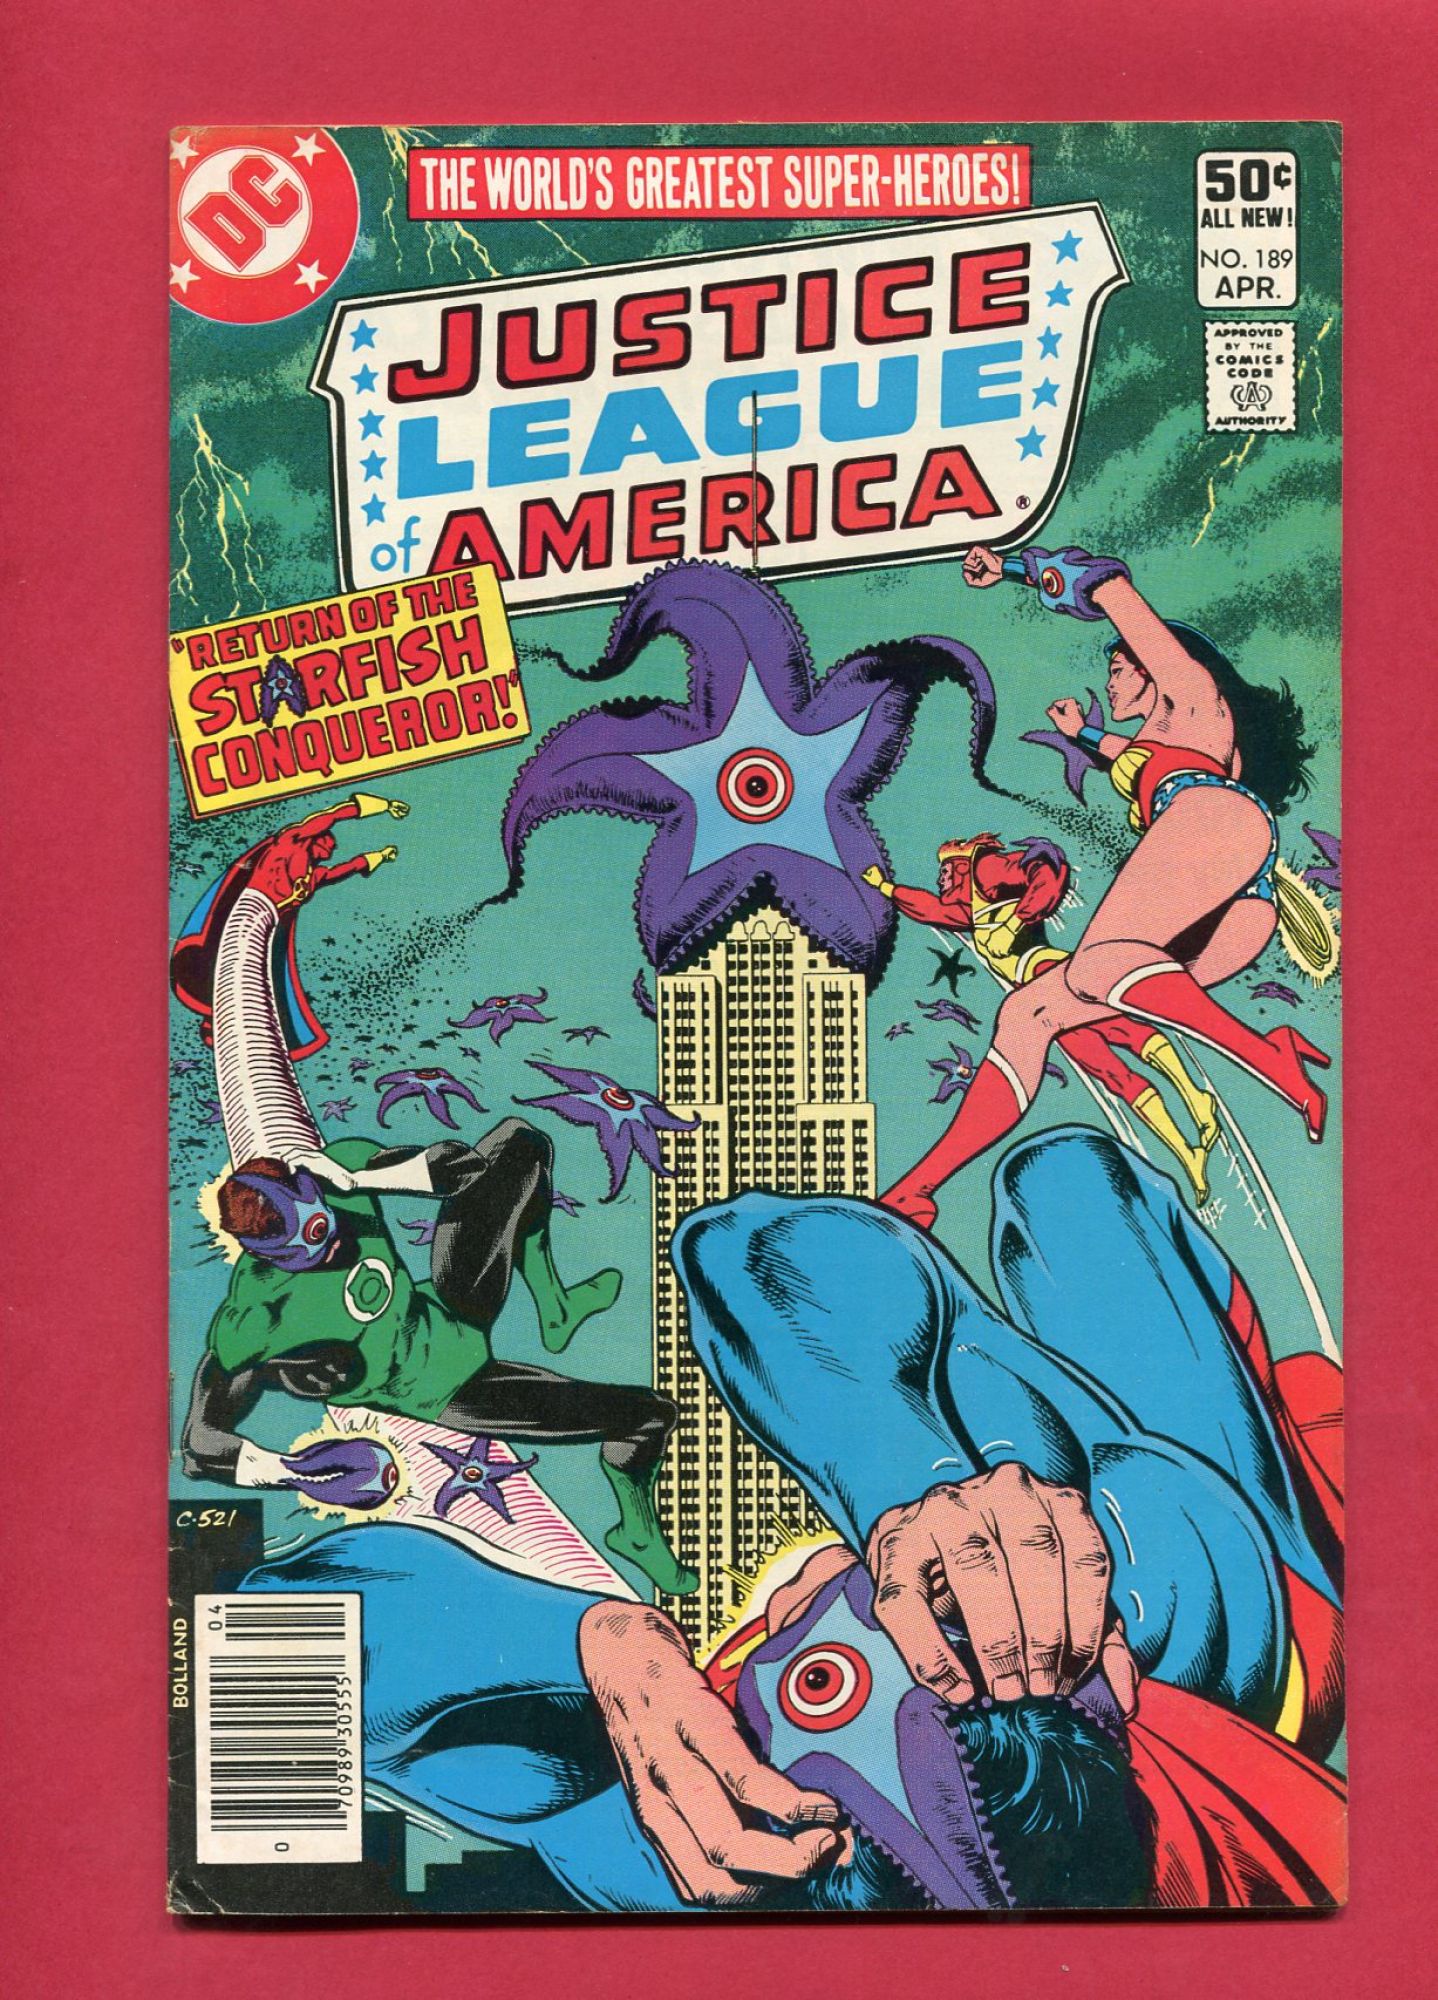 Justice League of America #189, Apr 1981, 7.0 FN/VF